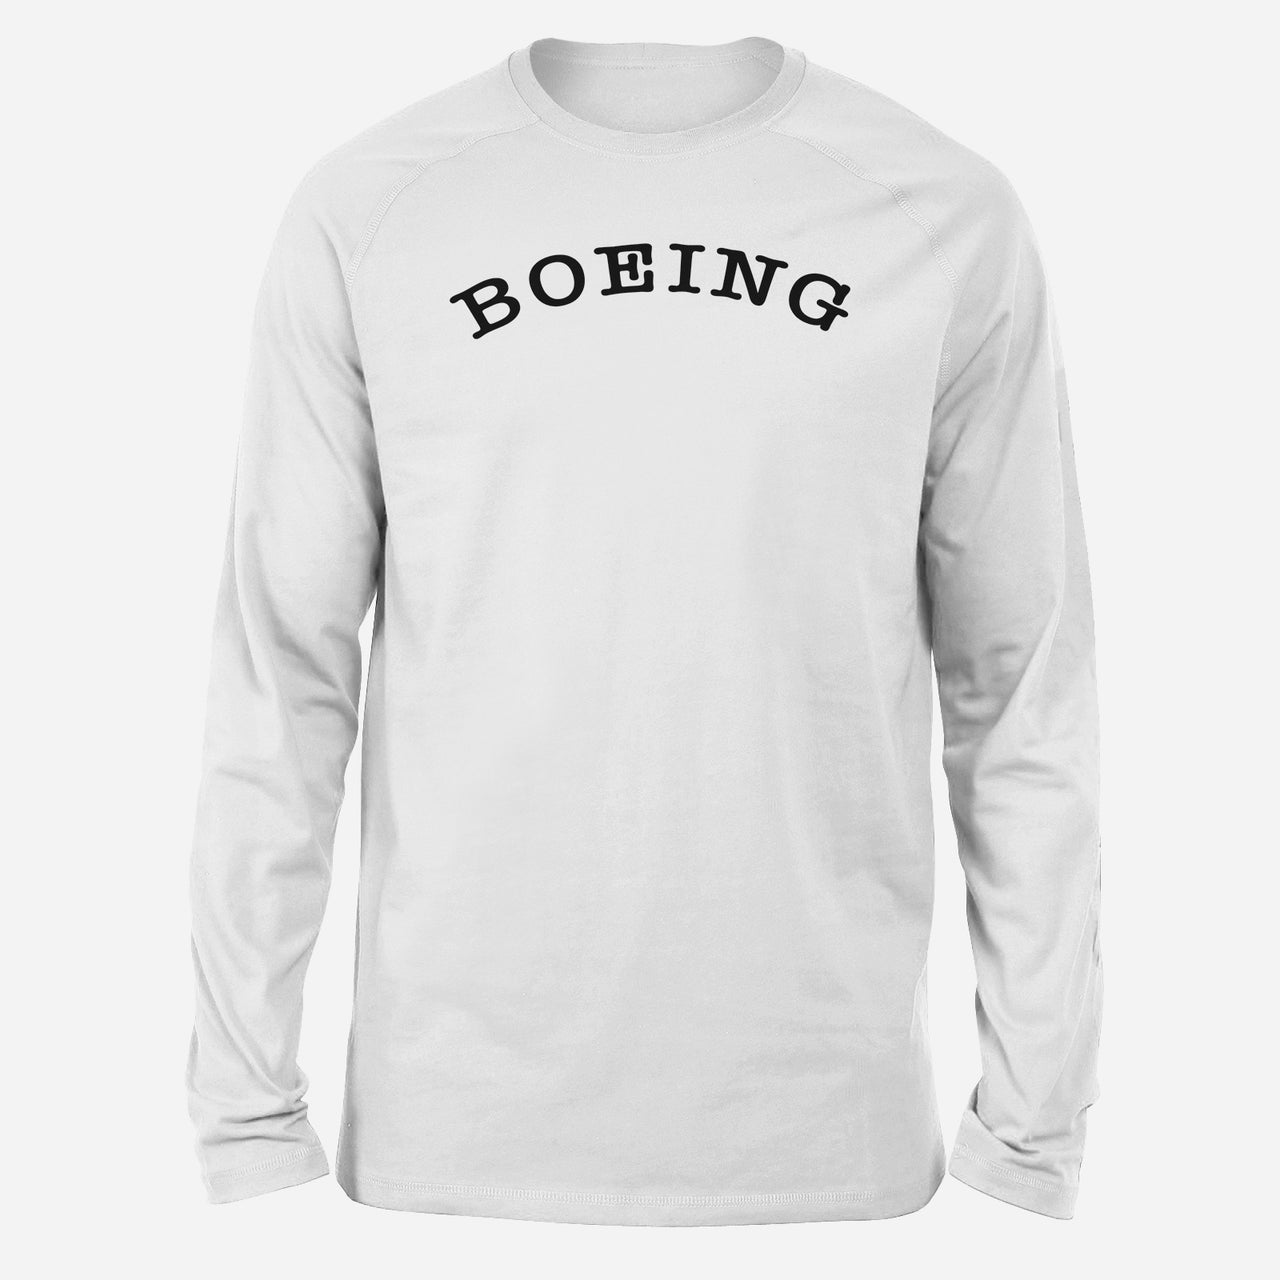 Special BOEING Text Designed Long-Sleeve T-Shirts